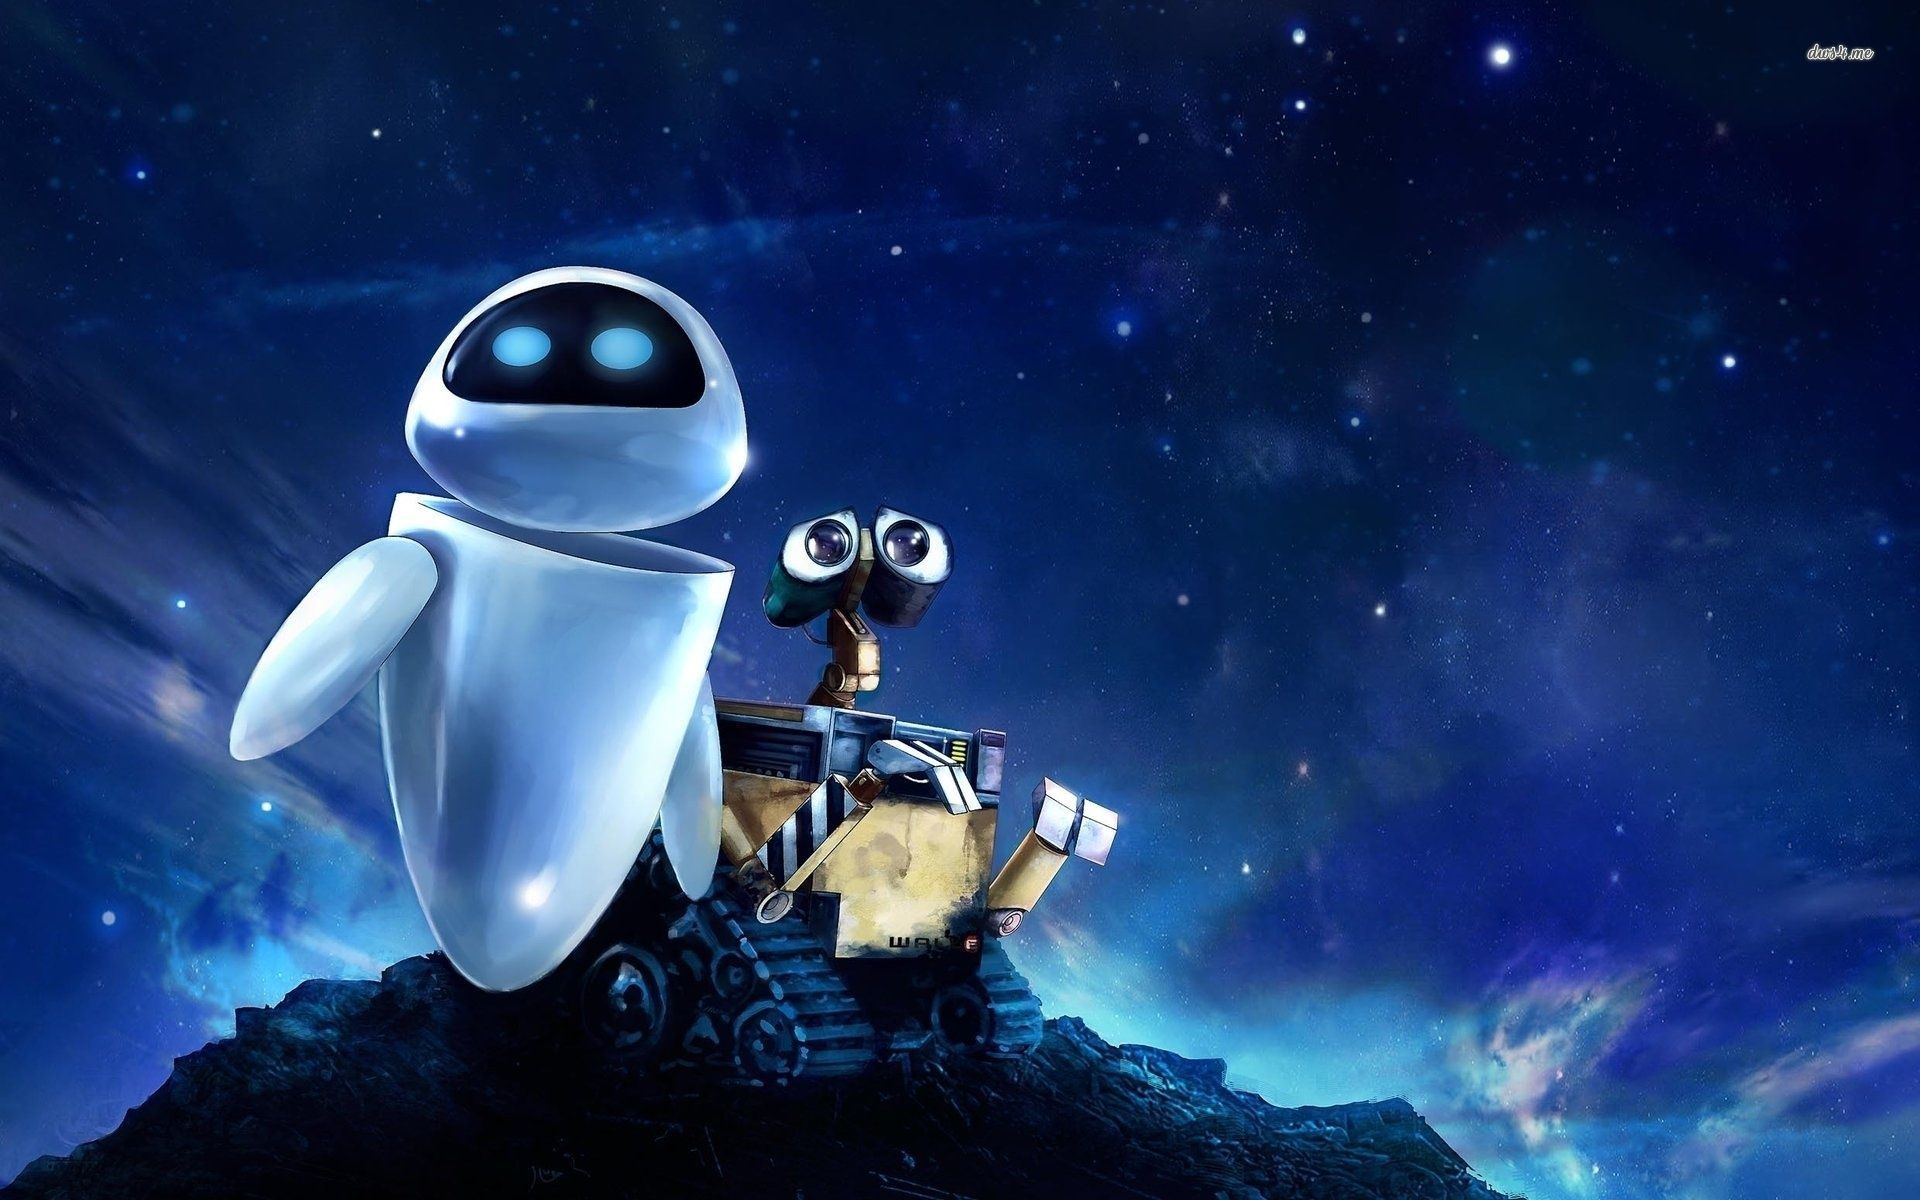 EVE From Wall E Is The Best Disney Princess. Art